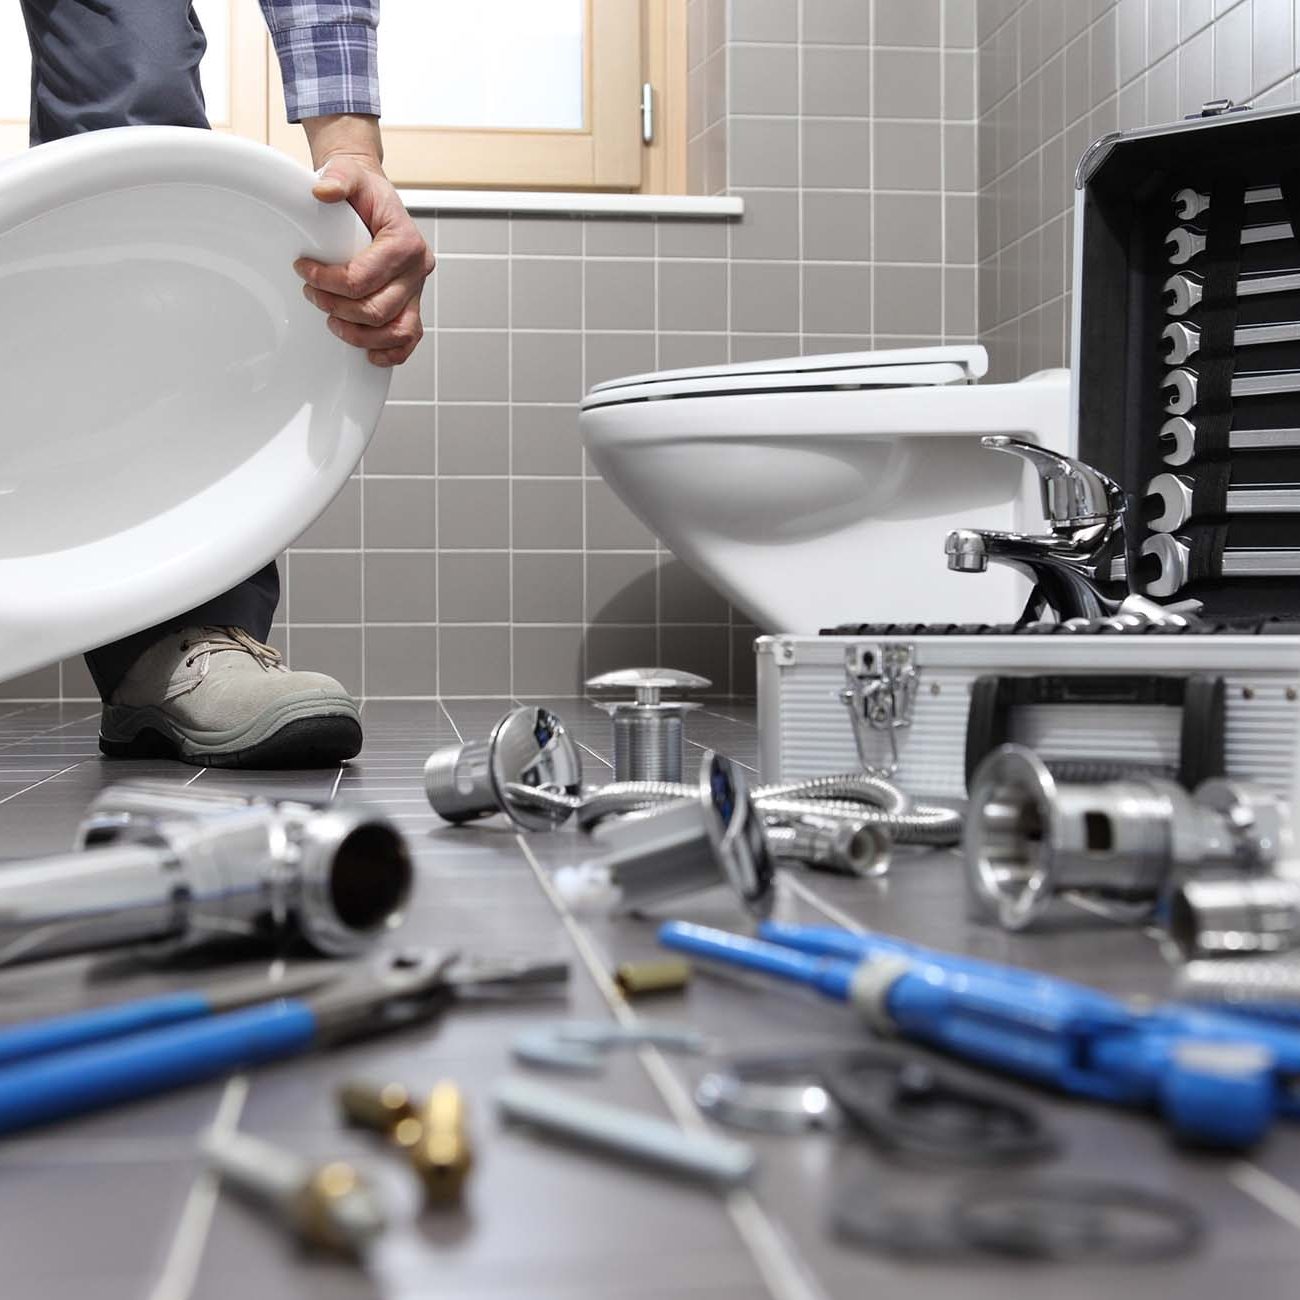 Plumber at work in a bathroom, plumbing repair service, assemble and install concept